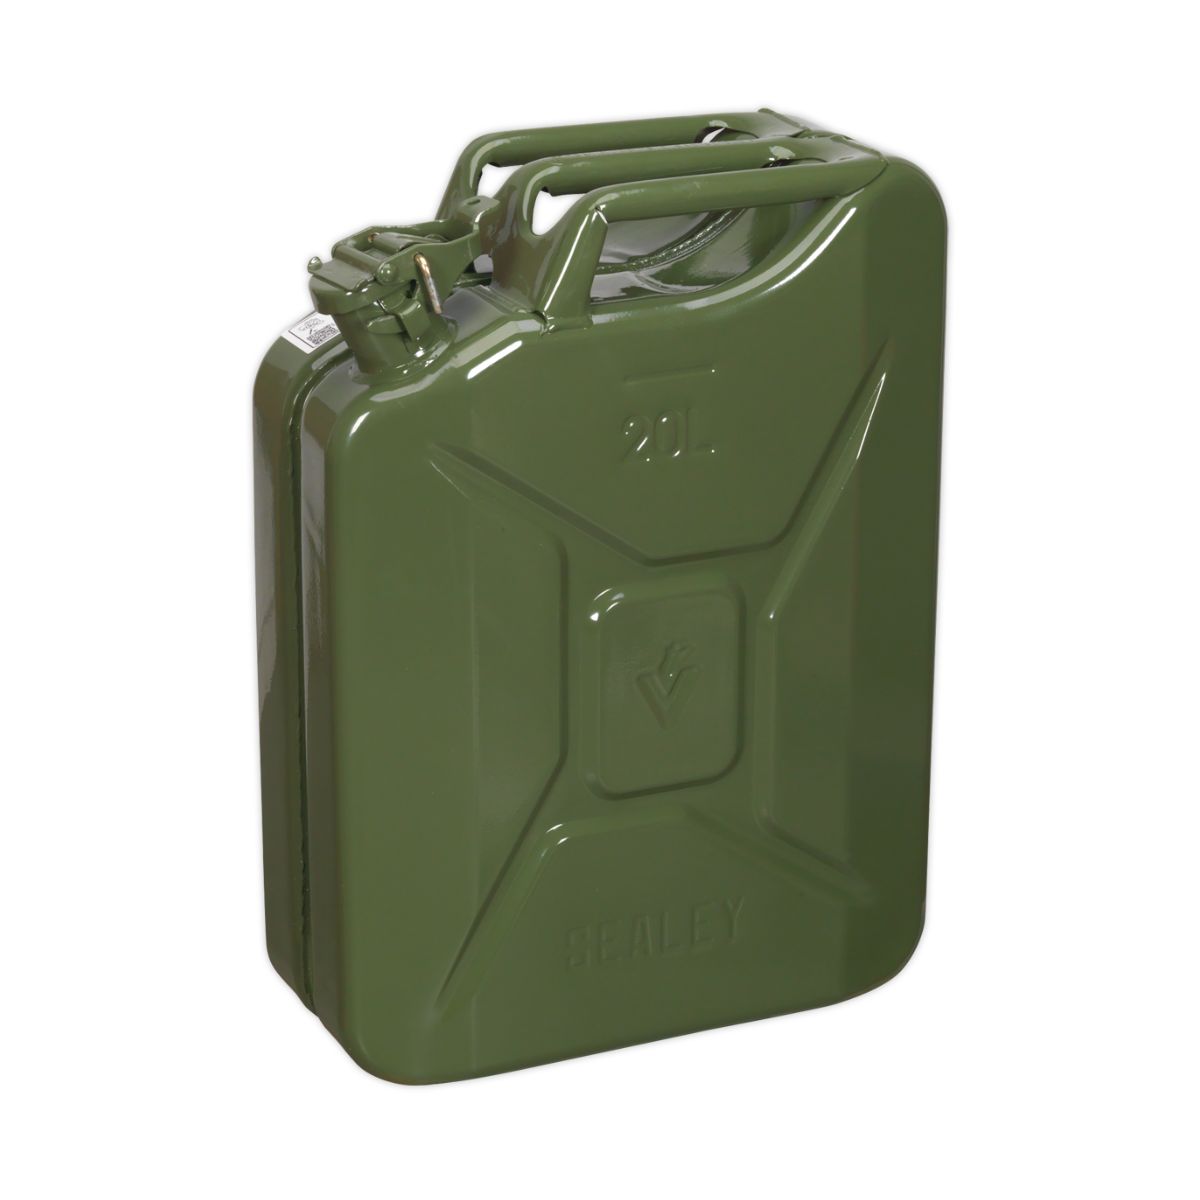 20L Petrol Jerry Can - Green Metal Jerry Can (JC20G)